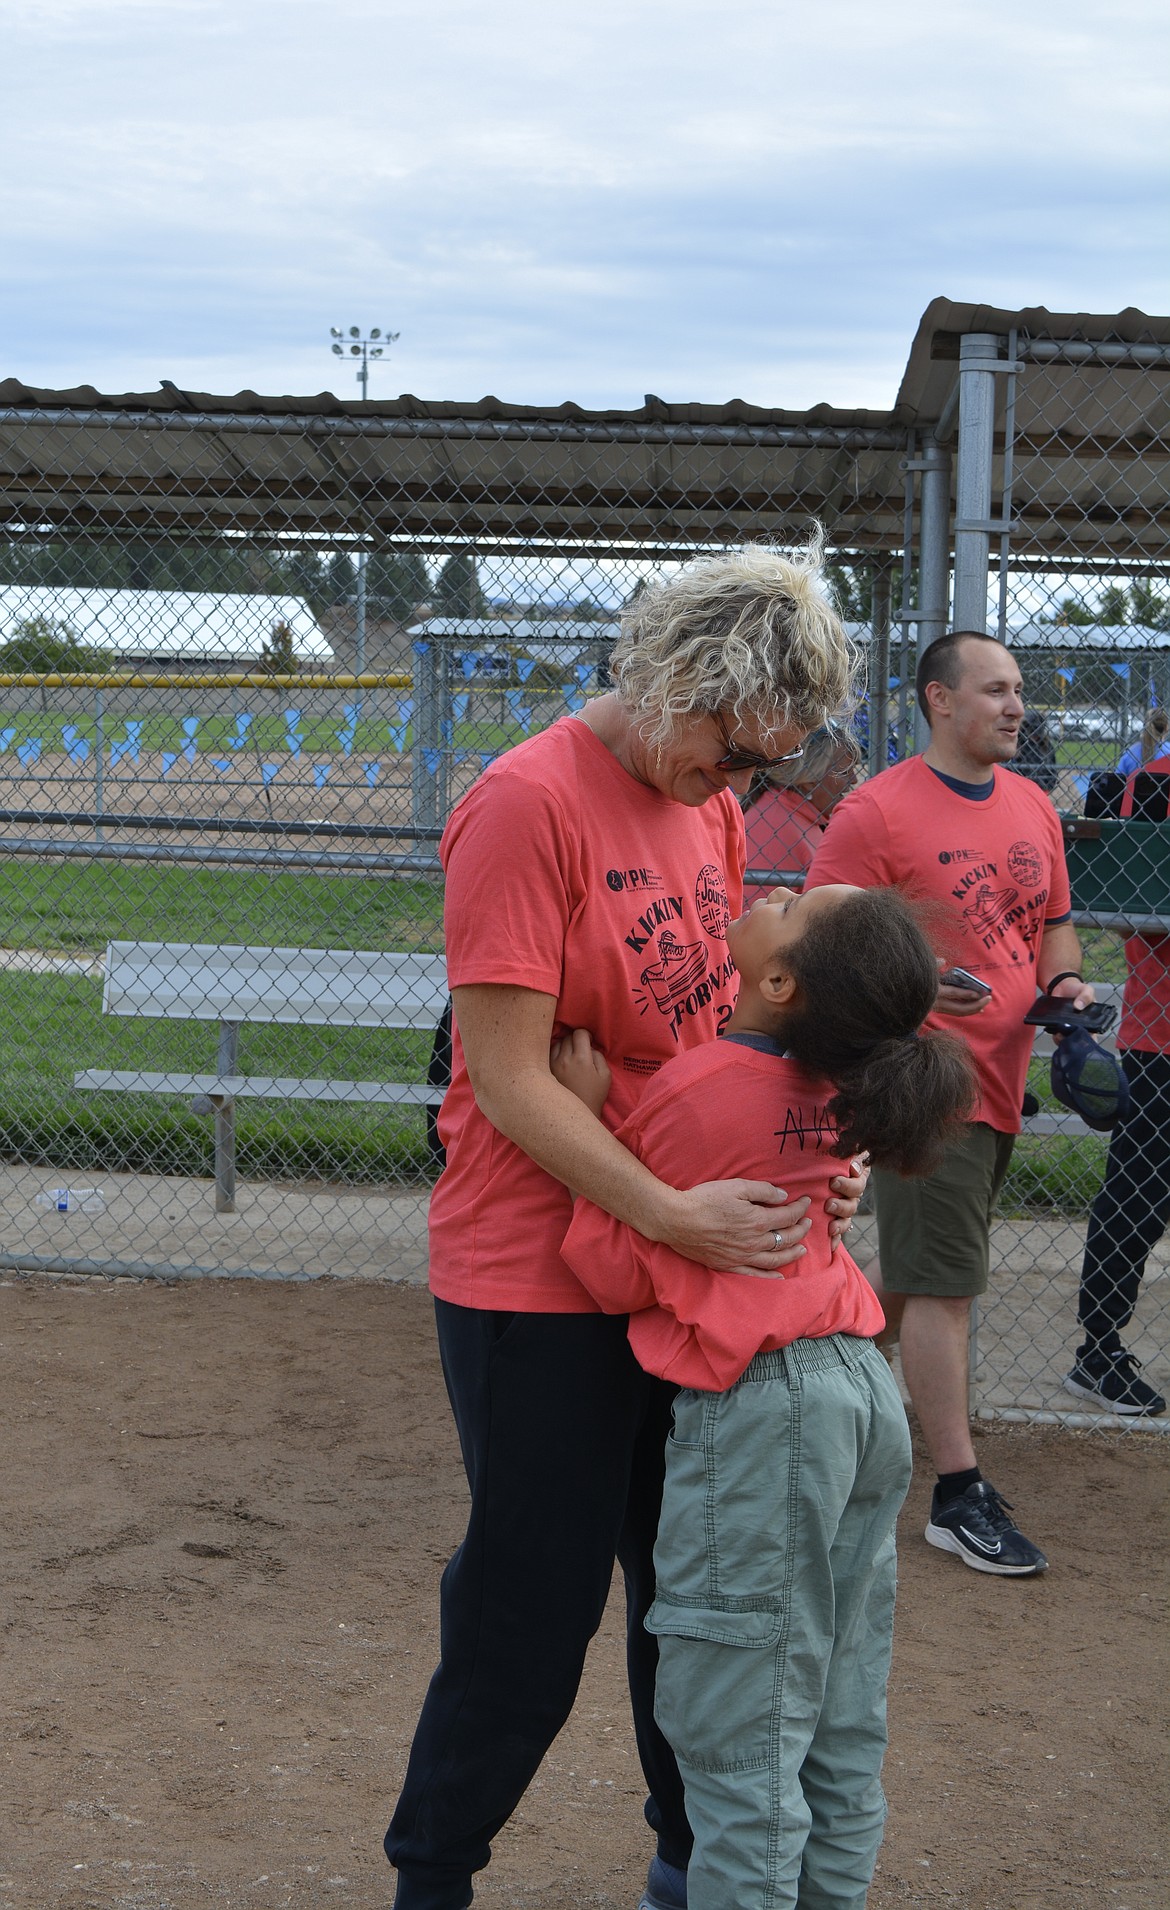 Monica Zylstra and Abby Zylstra celebrate their win with a hug after the Ladder Legends real Estate team scored 1-0 over Windermere Real Estate during the Kickin' It Forward kickball tournament.